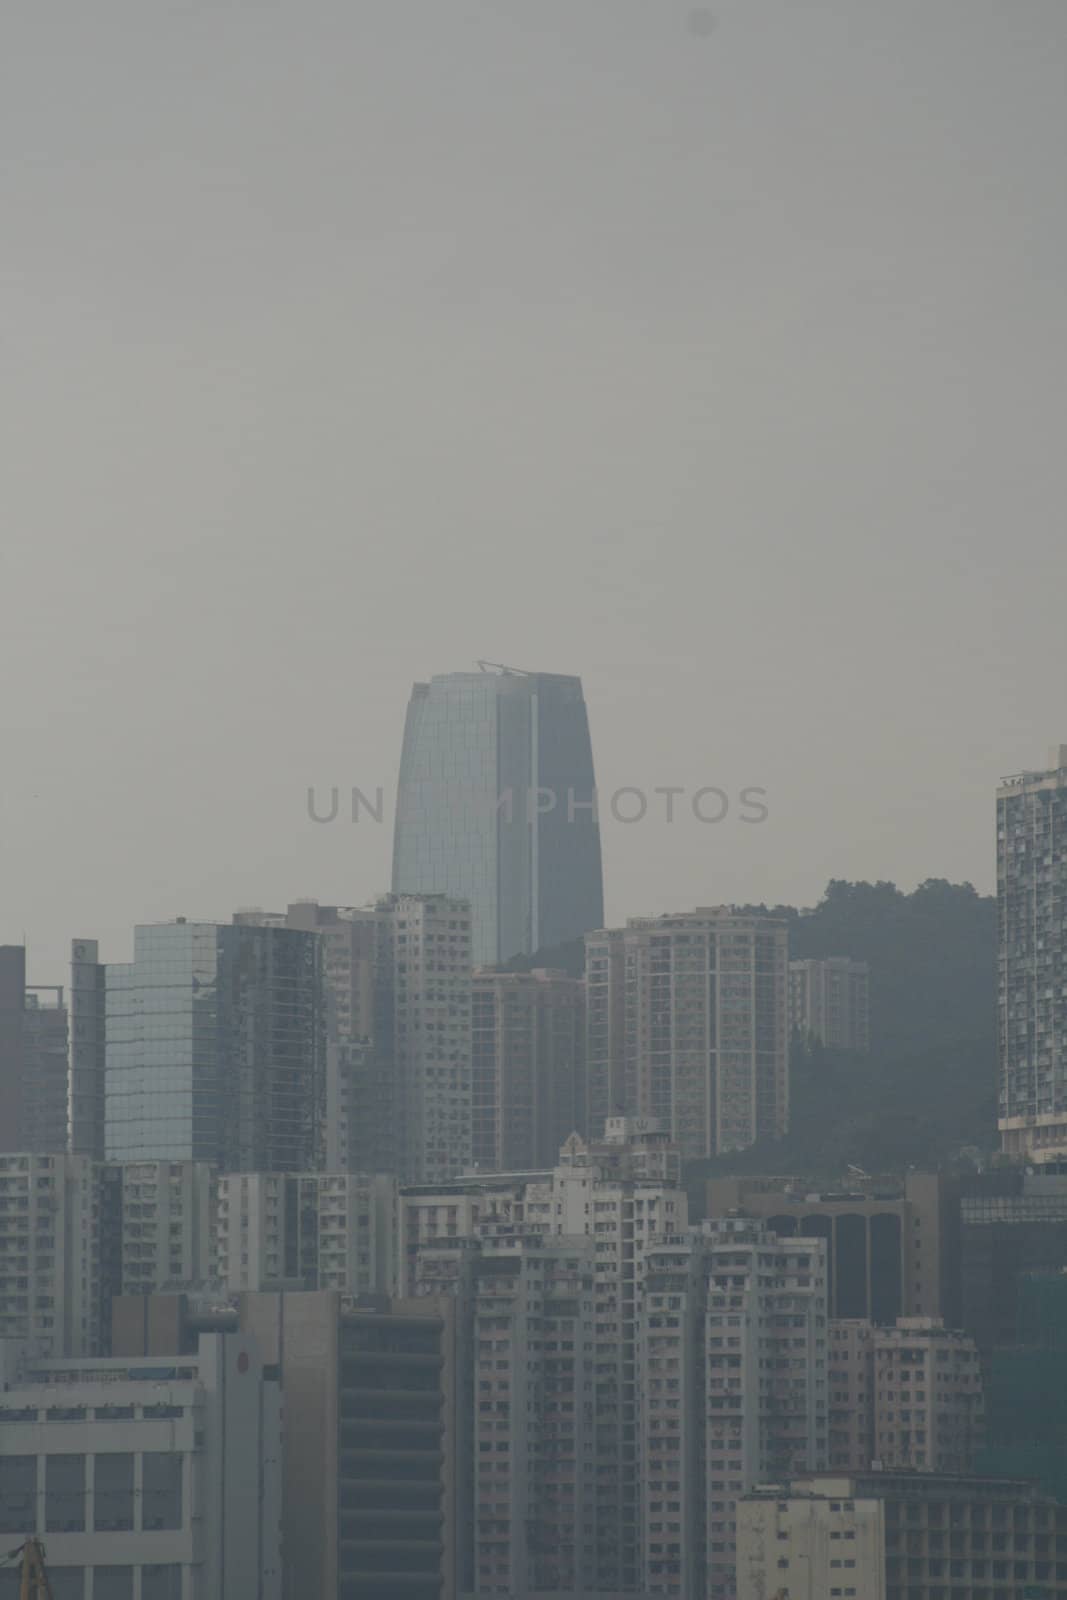 Skyscraper in Hong Kong skyline as seen from the S by koep